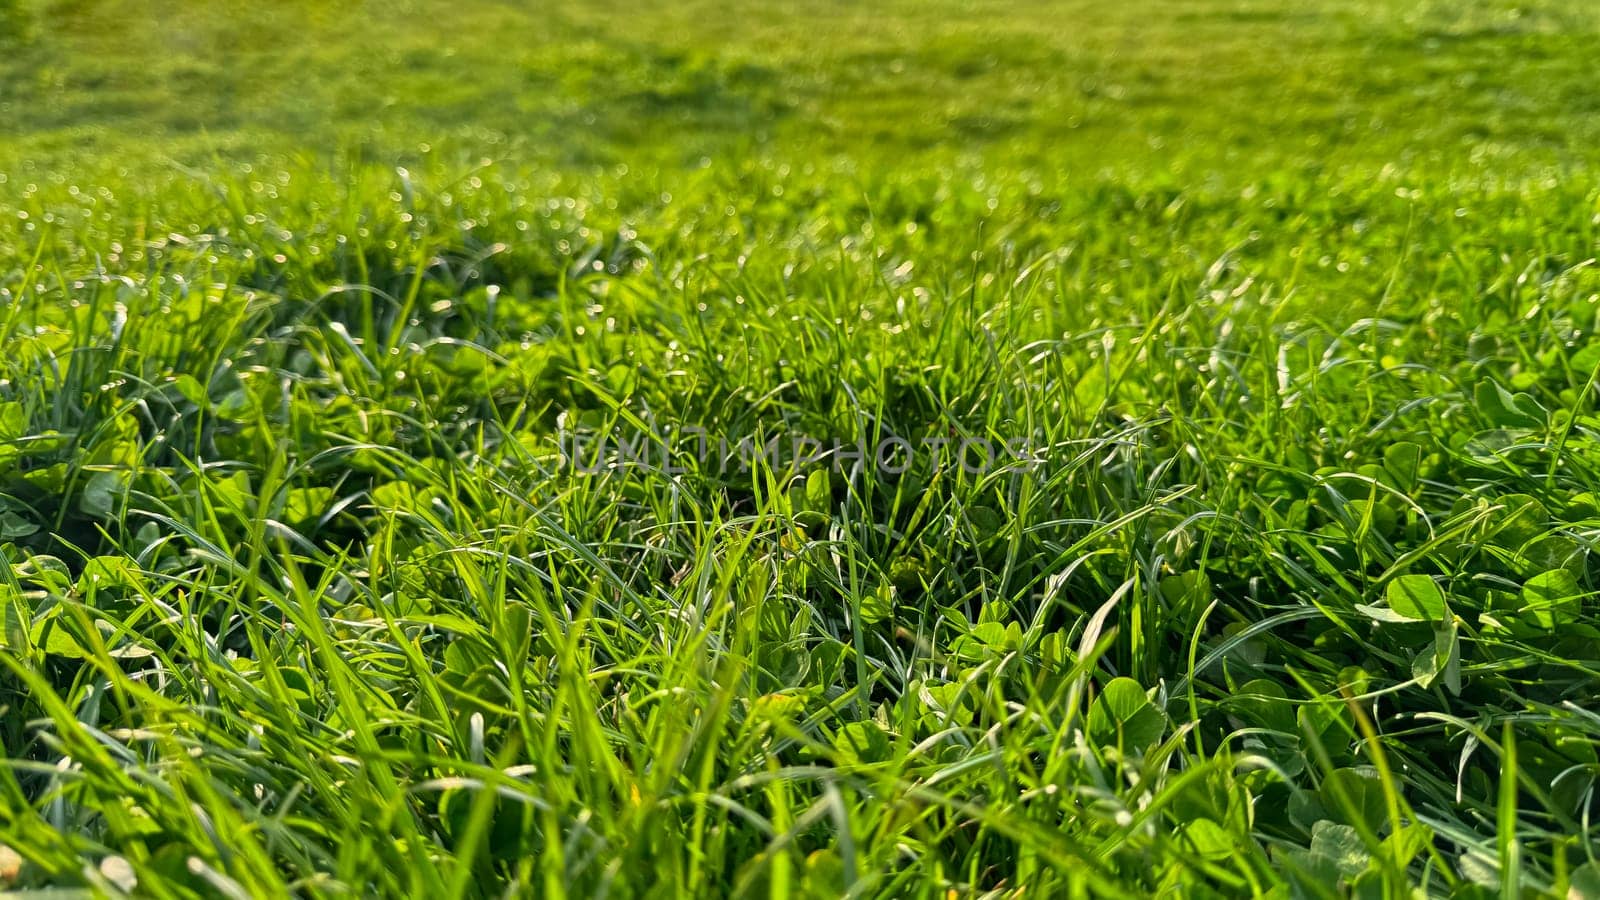 Background natural fresh green grass and clover leaves close up. Luminous dewy lawn, spring freshness, nature detail with morning light concept for design and print. by Lunnica